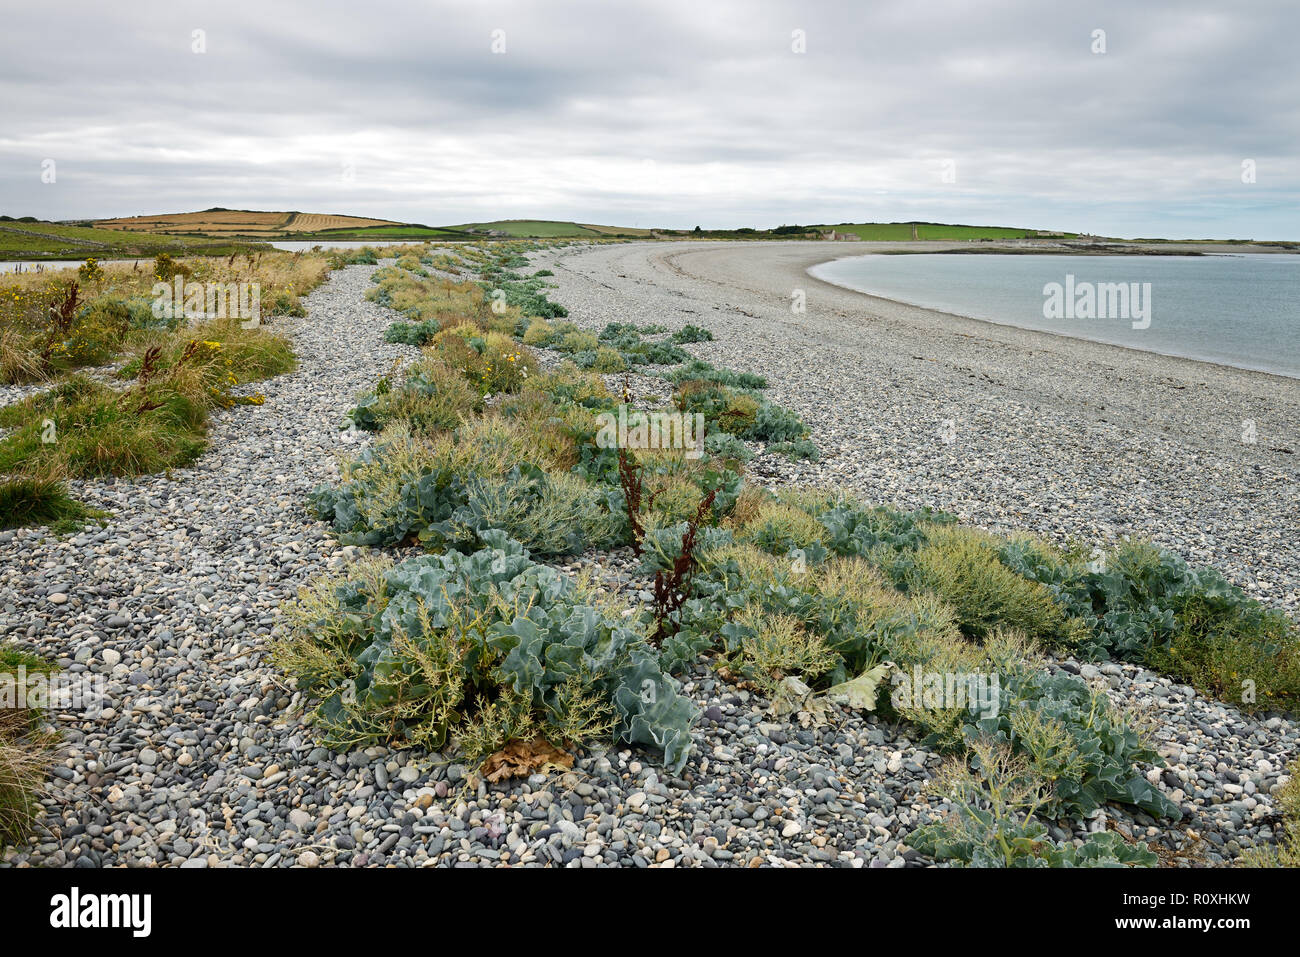 Cemlyn Bay is on the northwest coast of Anglesey. It has a shingle beach  with excellent strandline vegetation. Stock Photo